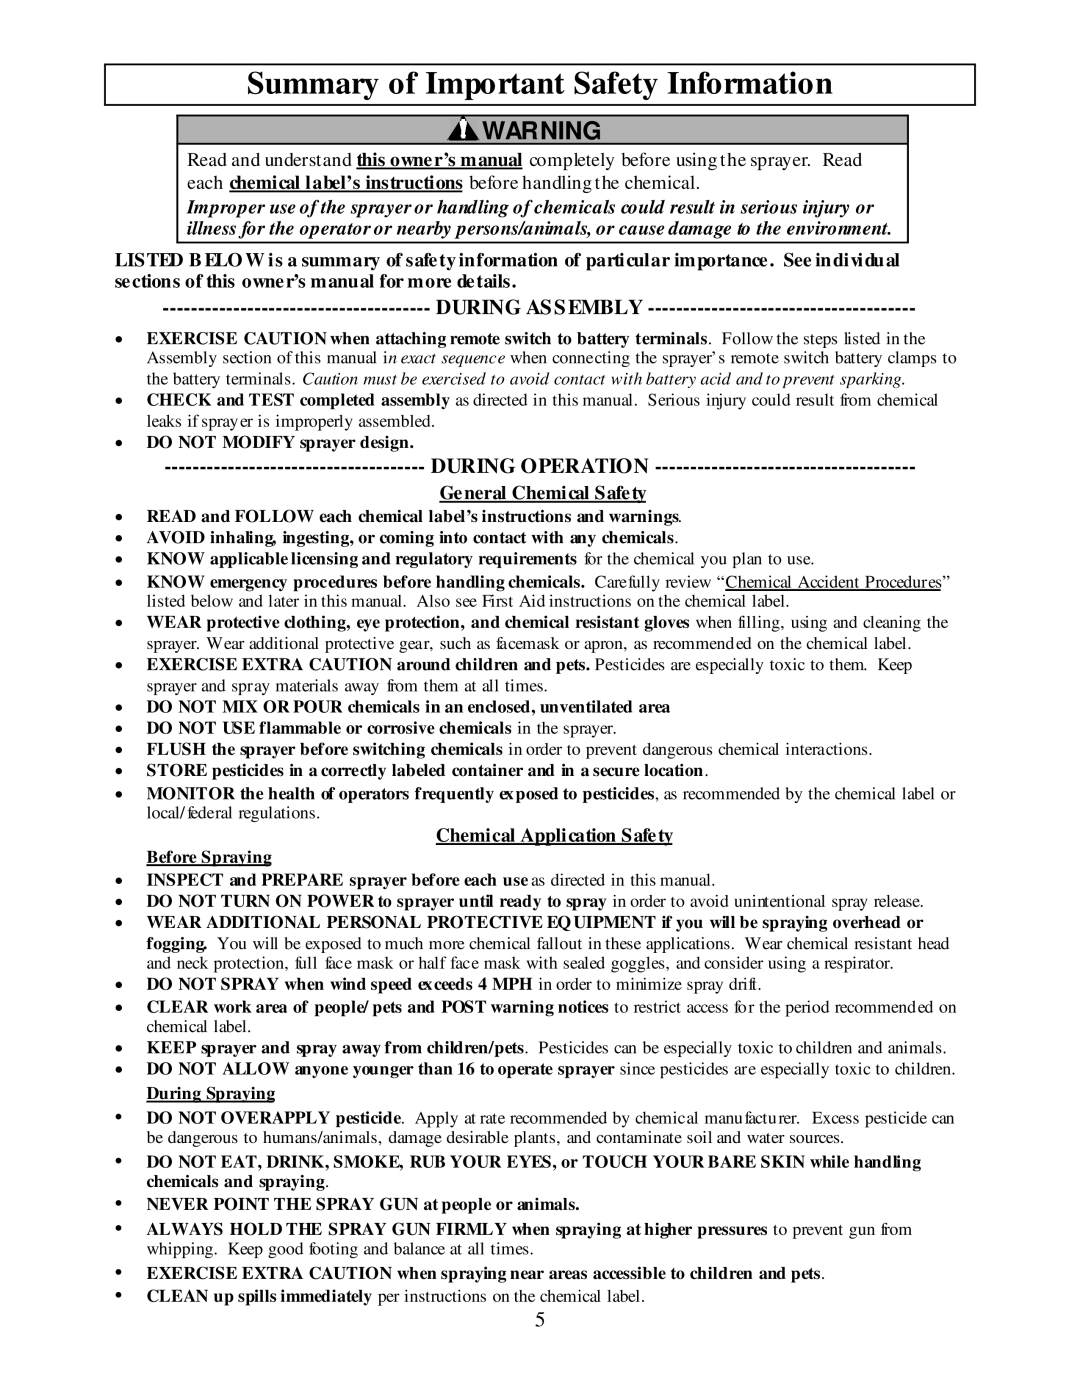 Panasonic M282737F Summary of Important Safety Information, During Assembly, During Operation, General Chemical Safety 